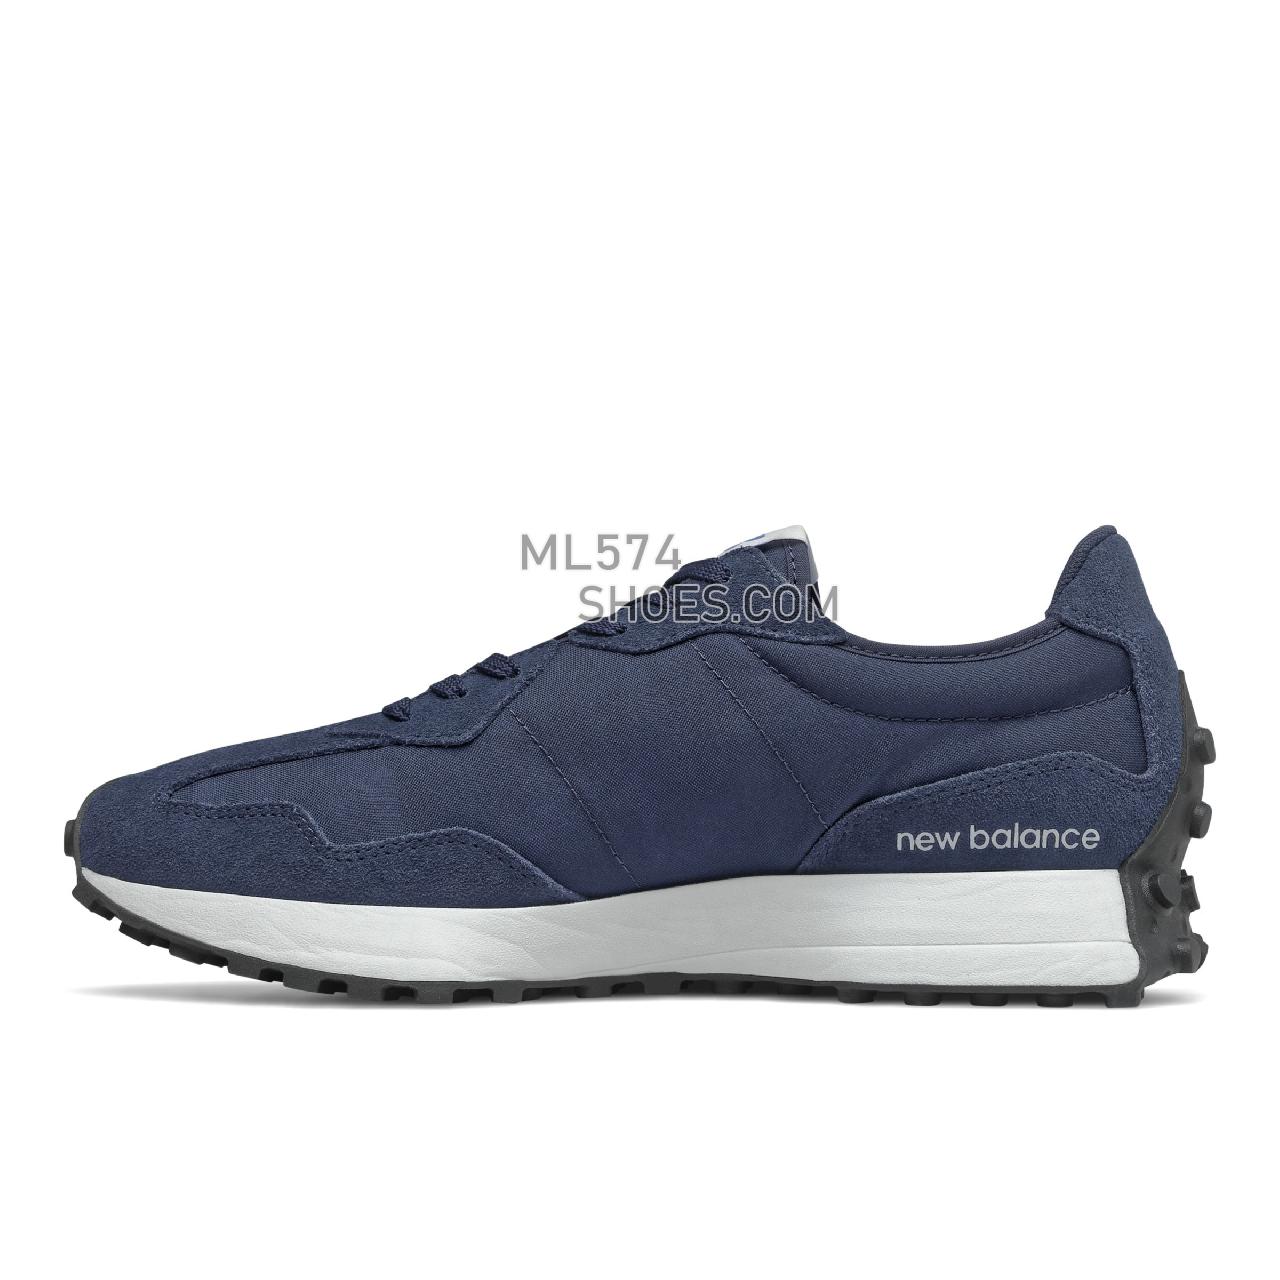 New Balance 327 - Unisex Men's Women's Sport Style Sneakers - Natural Indigo with White - MS327CPD